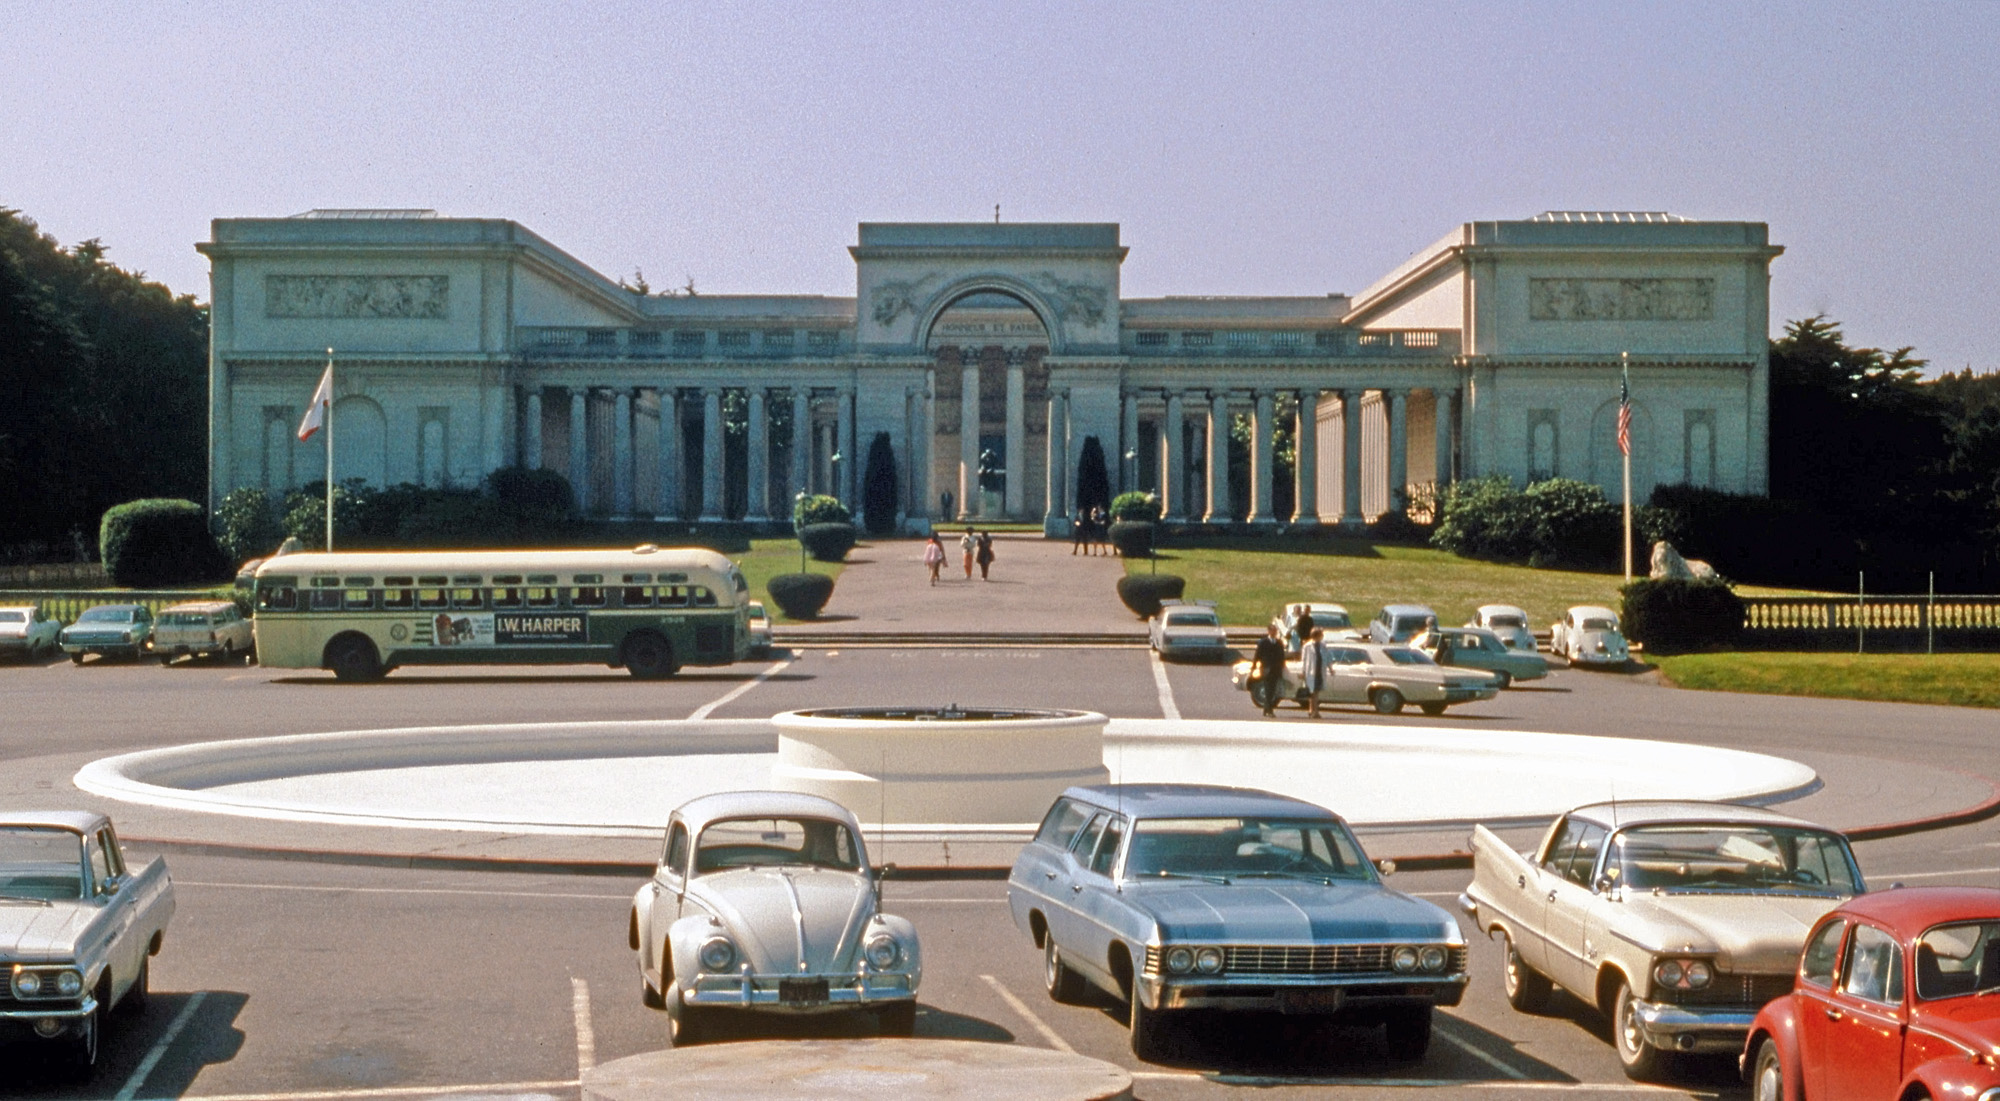 San Francisco, the Palace of the Legion of Honor in March 1969. My shot has a hint of Hitchcock with the older cars and bus. View full size.